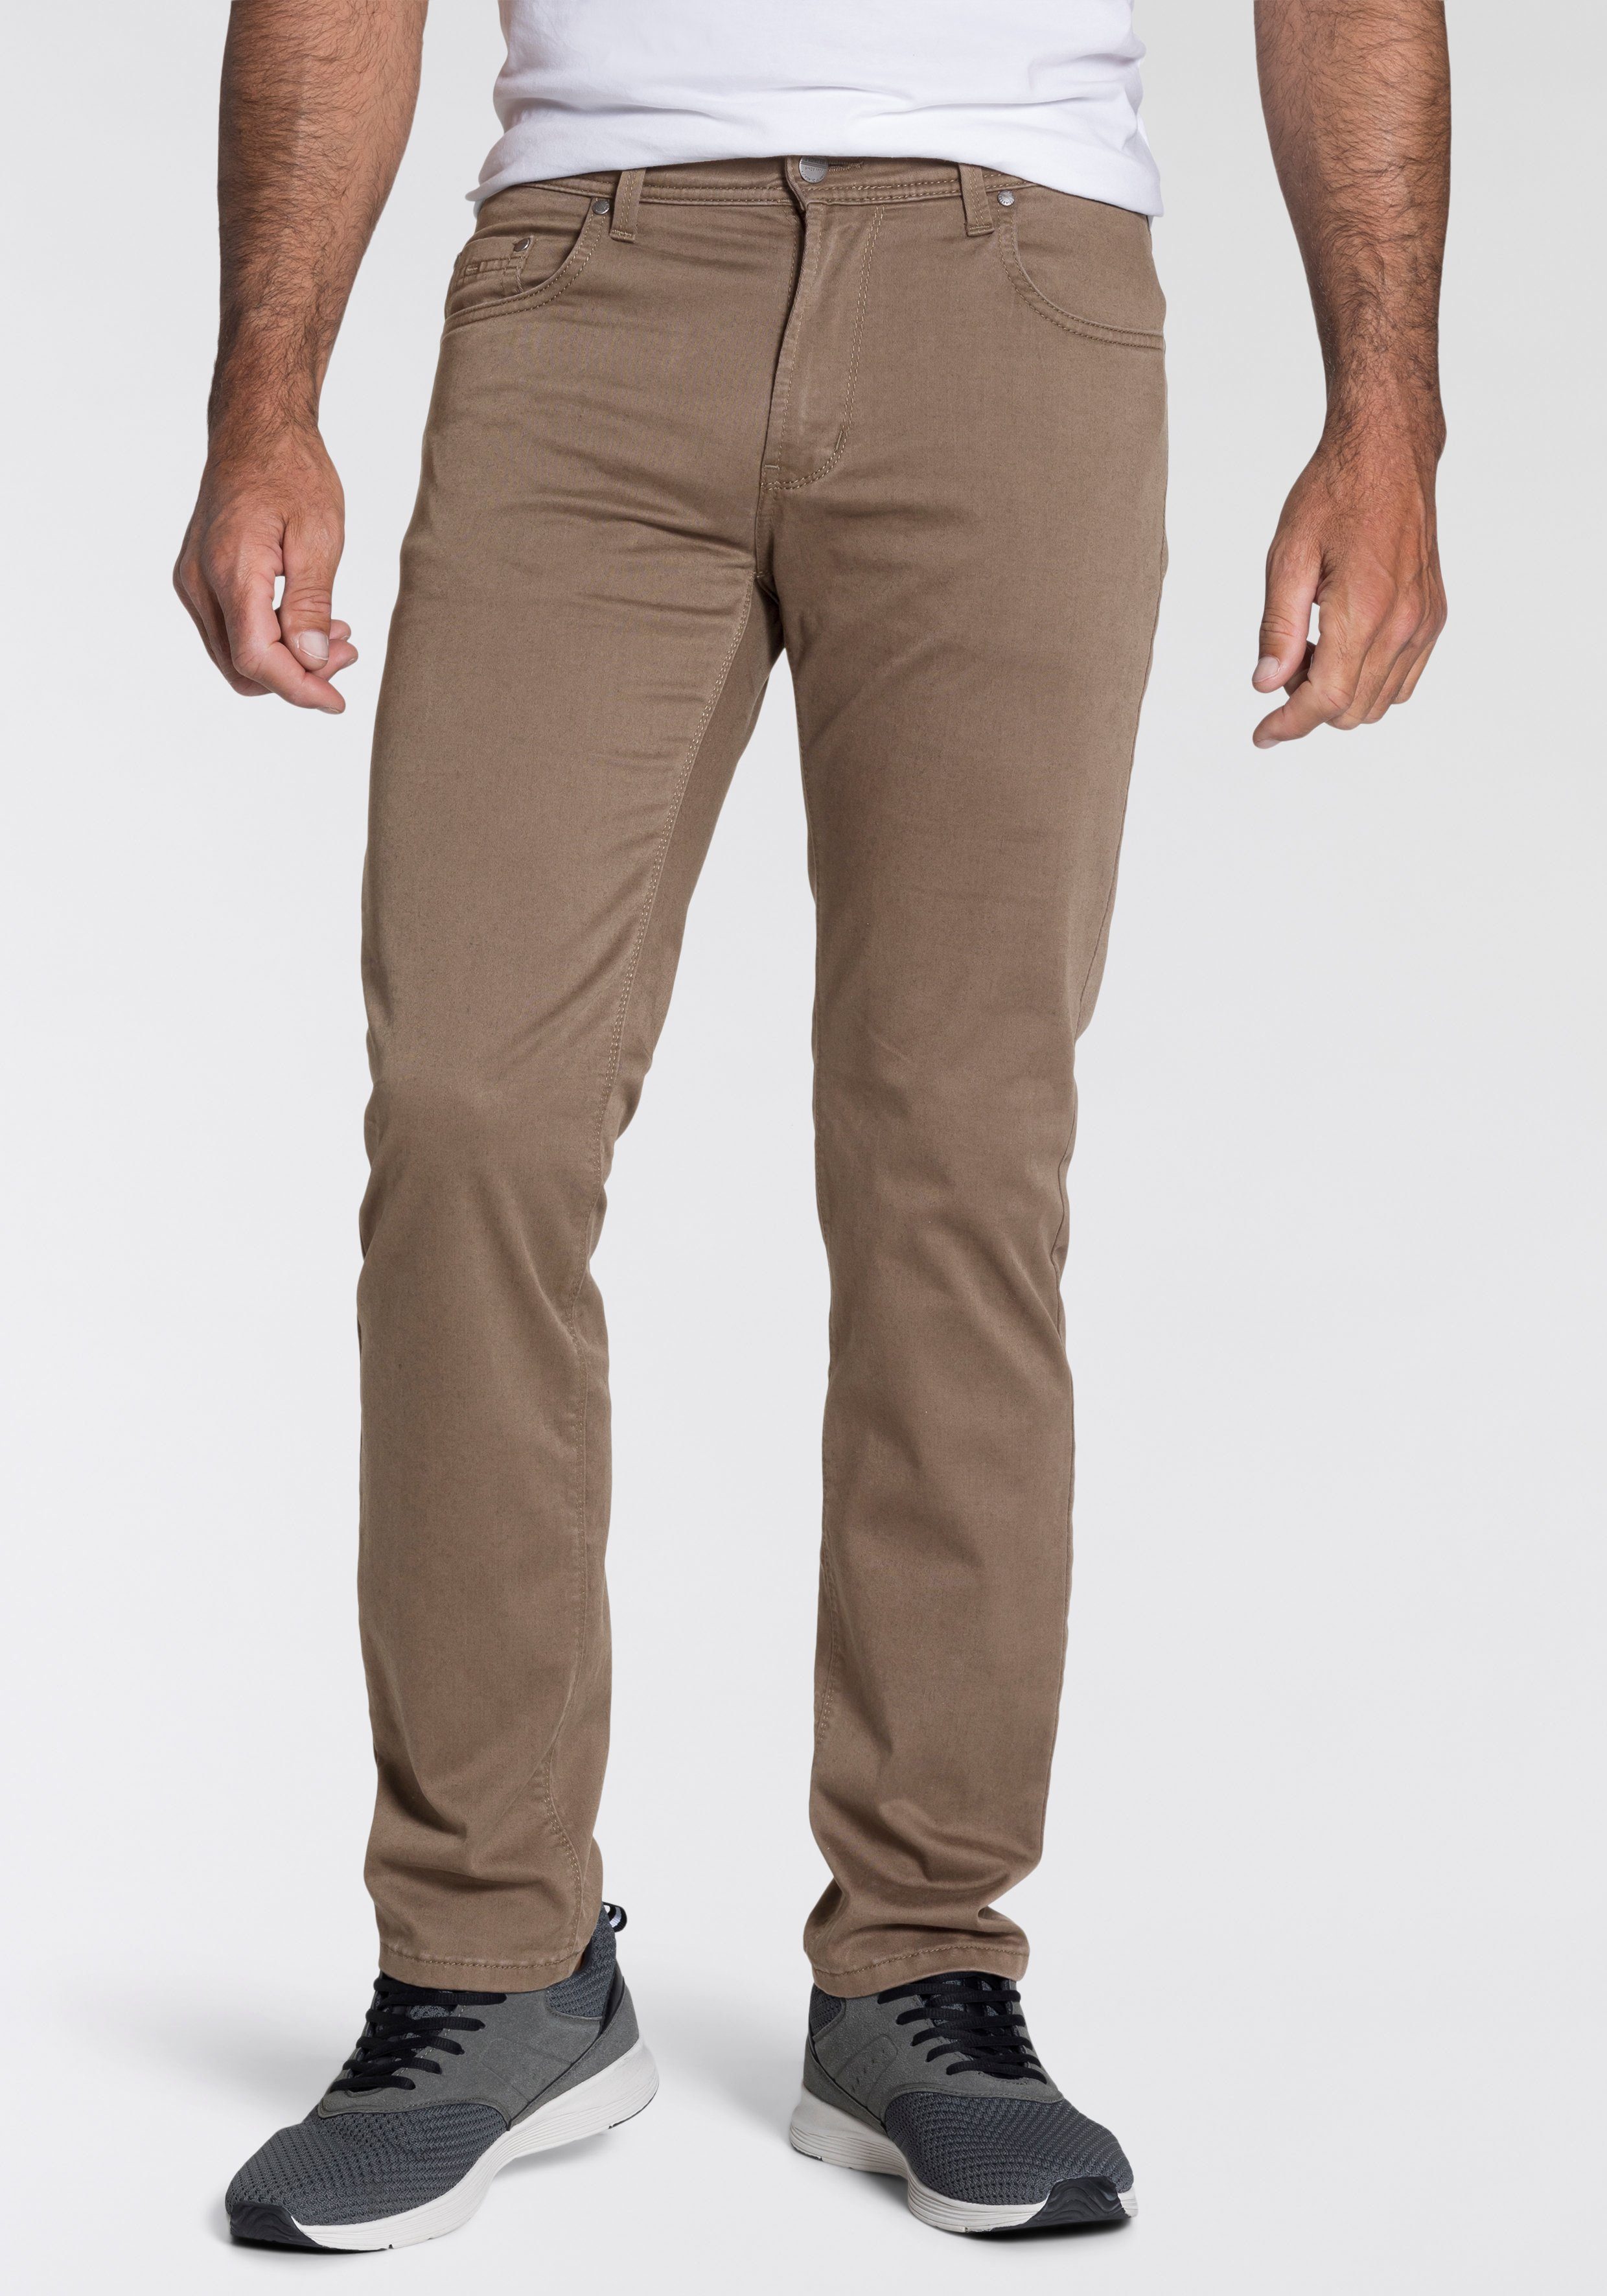 Pioneer Authentic Jeans taupe Thermolite Rando deep 5-Pocket-Hose